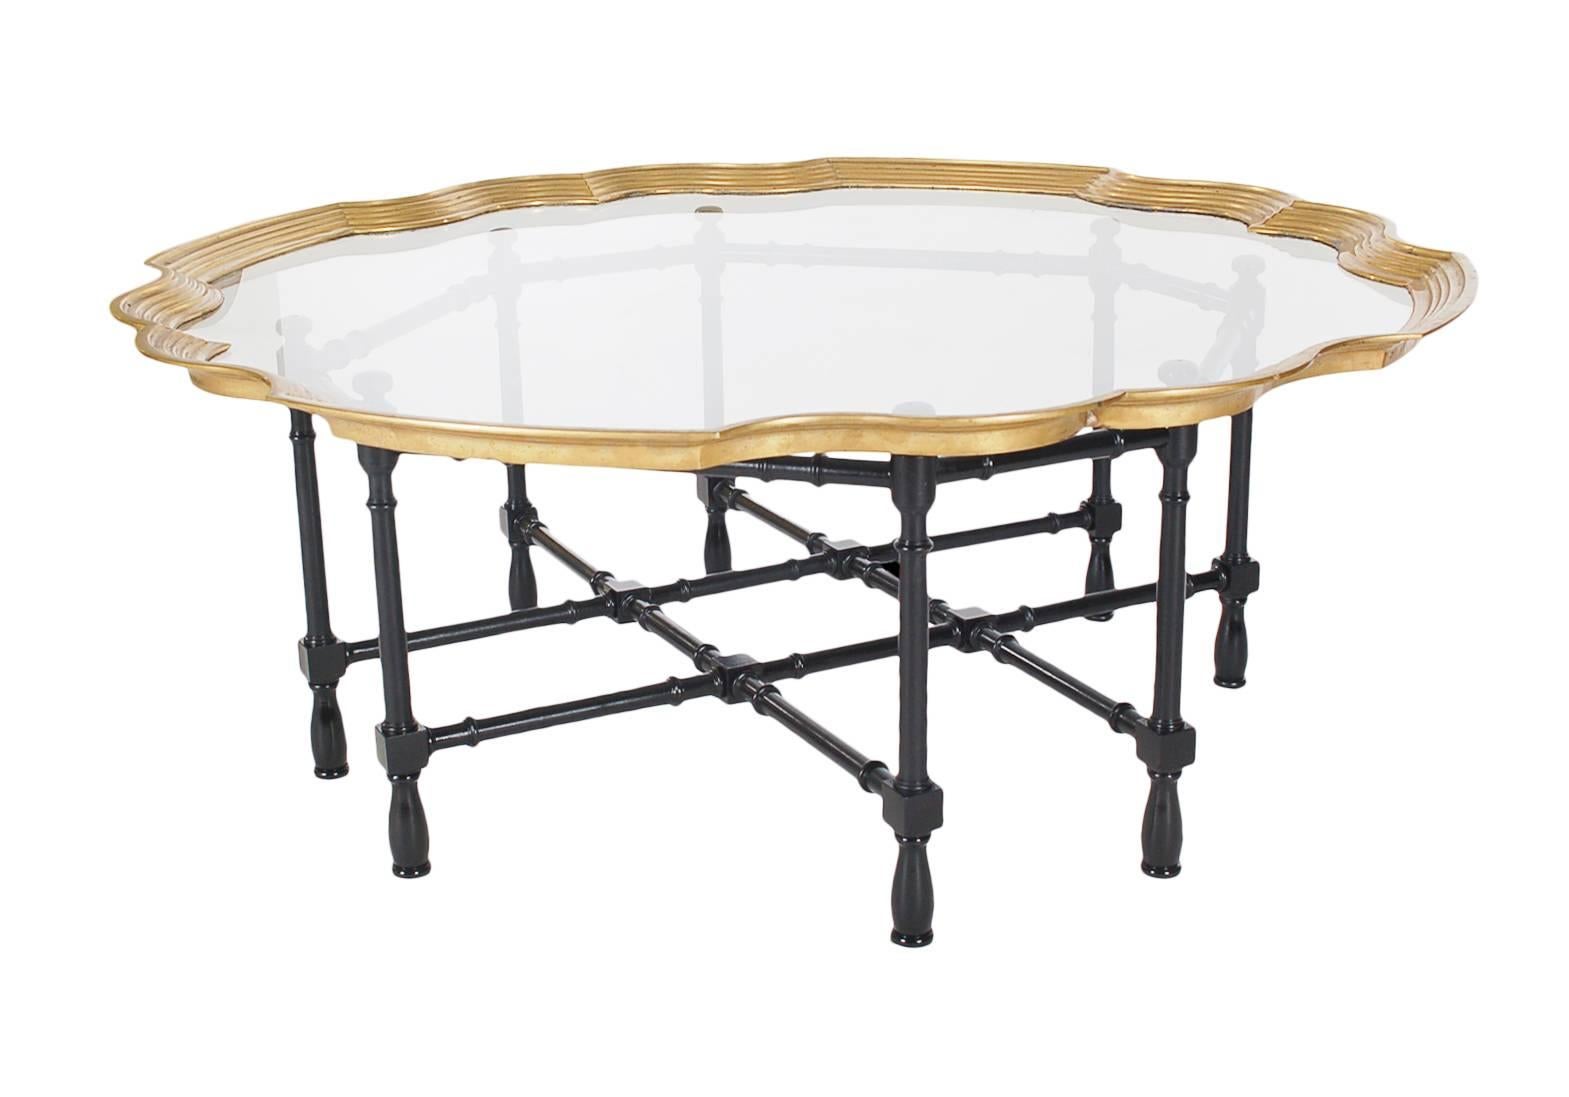 A chic and beautiful tray table with a faux bamboo base. It features a solid wood ebony bass with brass and glass top surface.